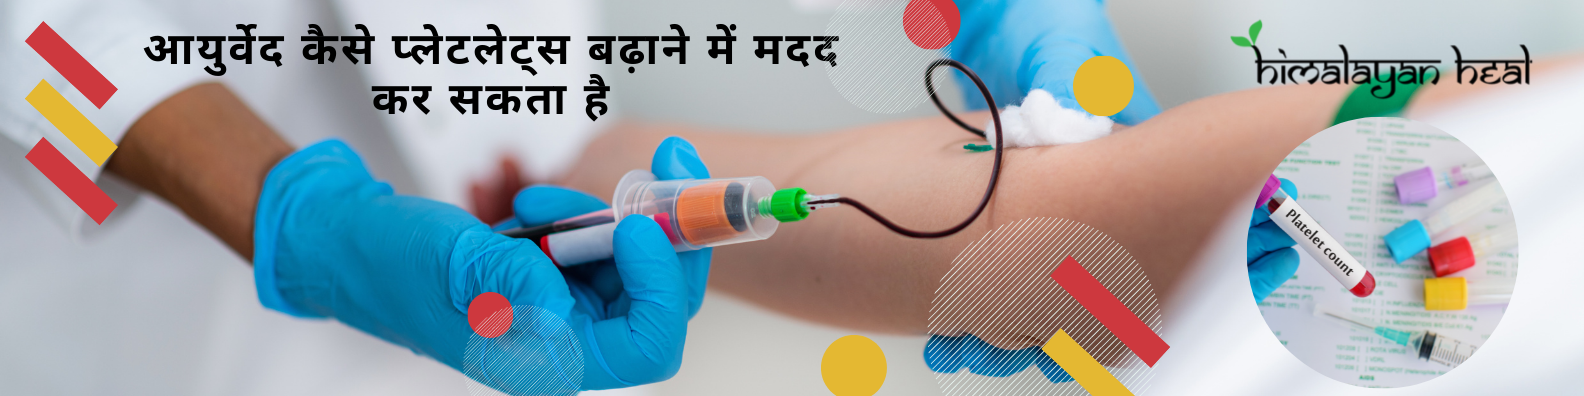 Blood platelets and ITP treatment in Ayurveda